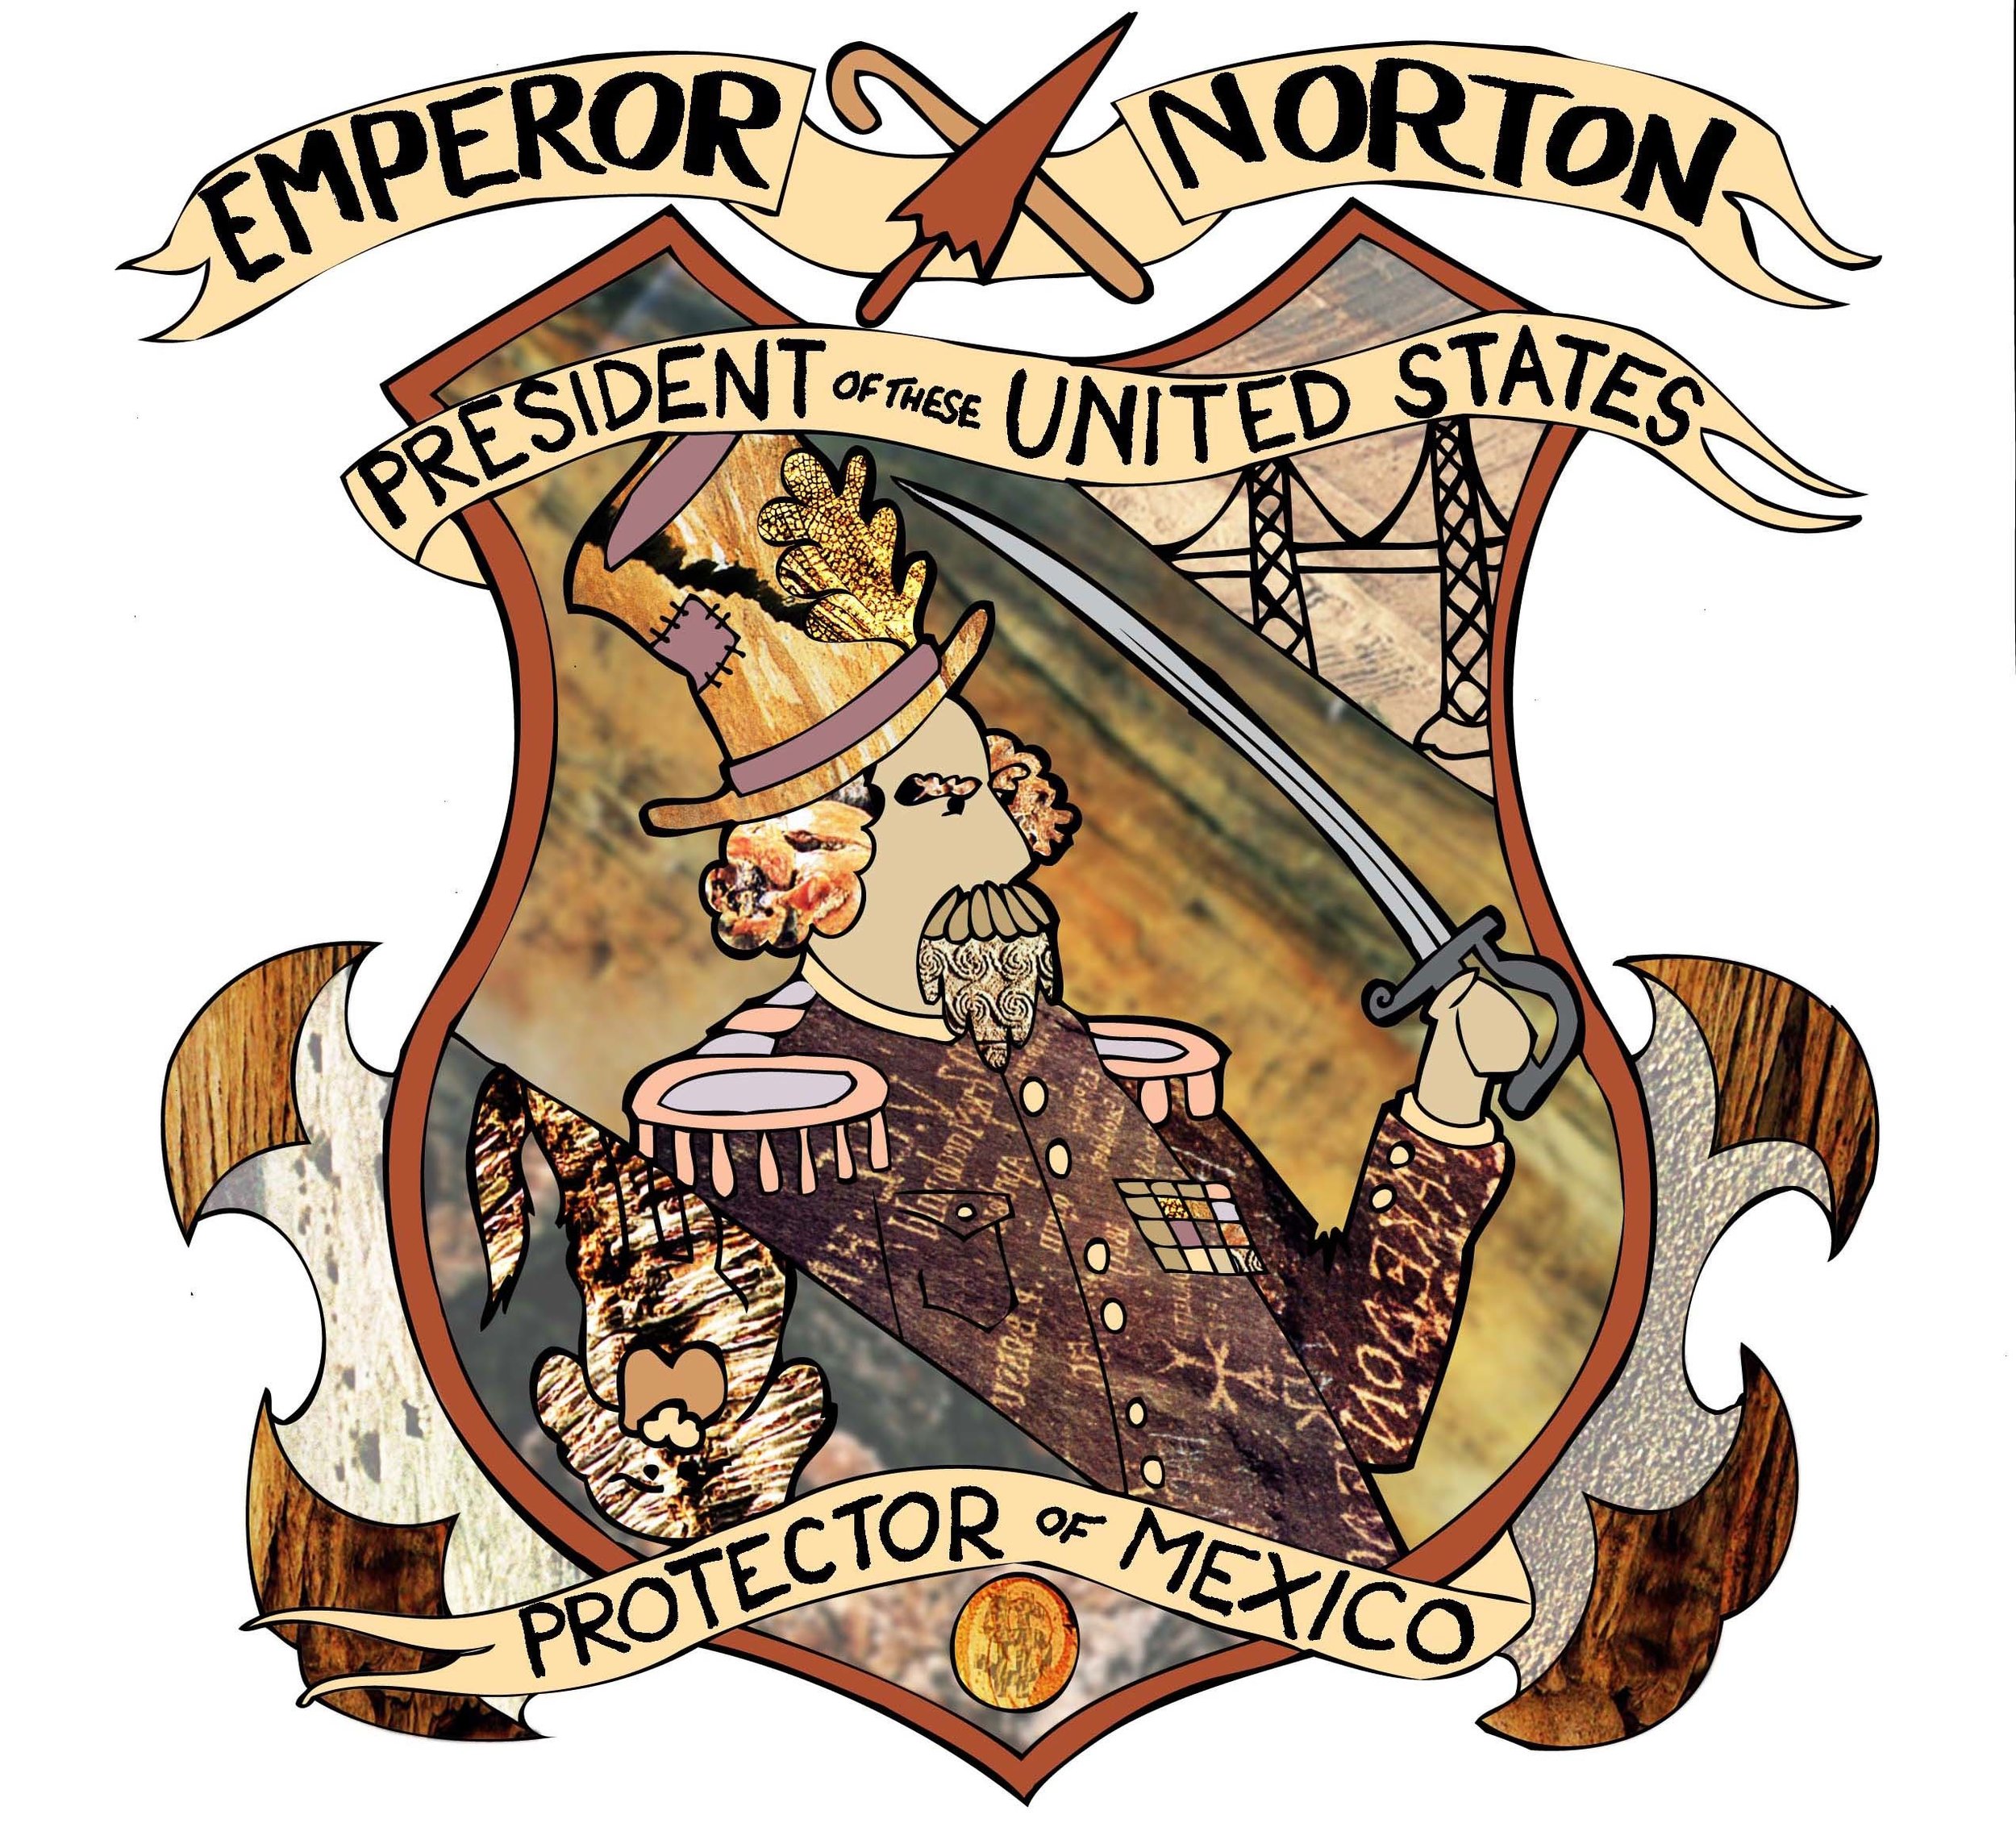   Emperor Norton Royal Crest, 2017, by Lyall Wallerstedt (b.1988).&nbsp; Mixed media, illustration and collage using  National Geographic  magazine clippings,&nbsp;Part of a series of eight. © 2017 Lyall Wallerstedt [Added 7.25.2017]  Source:  Lyall 